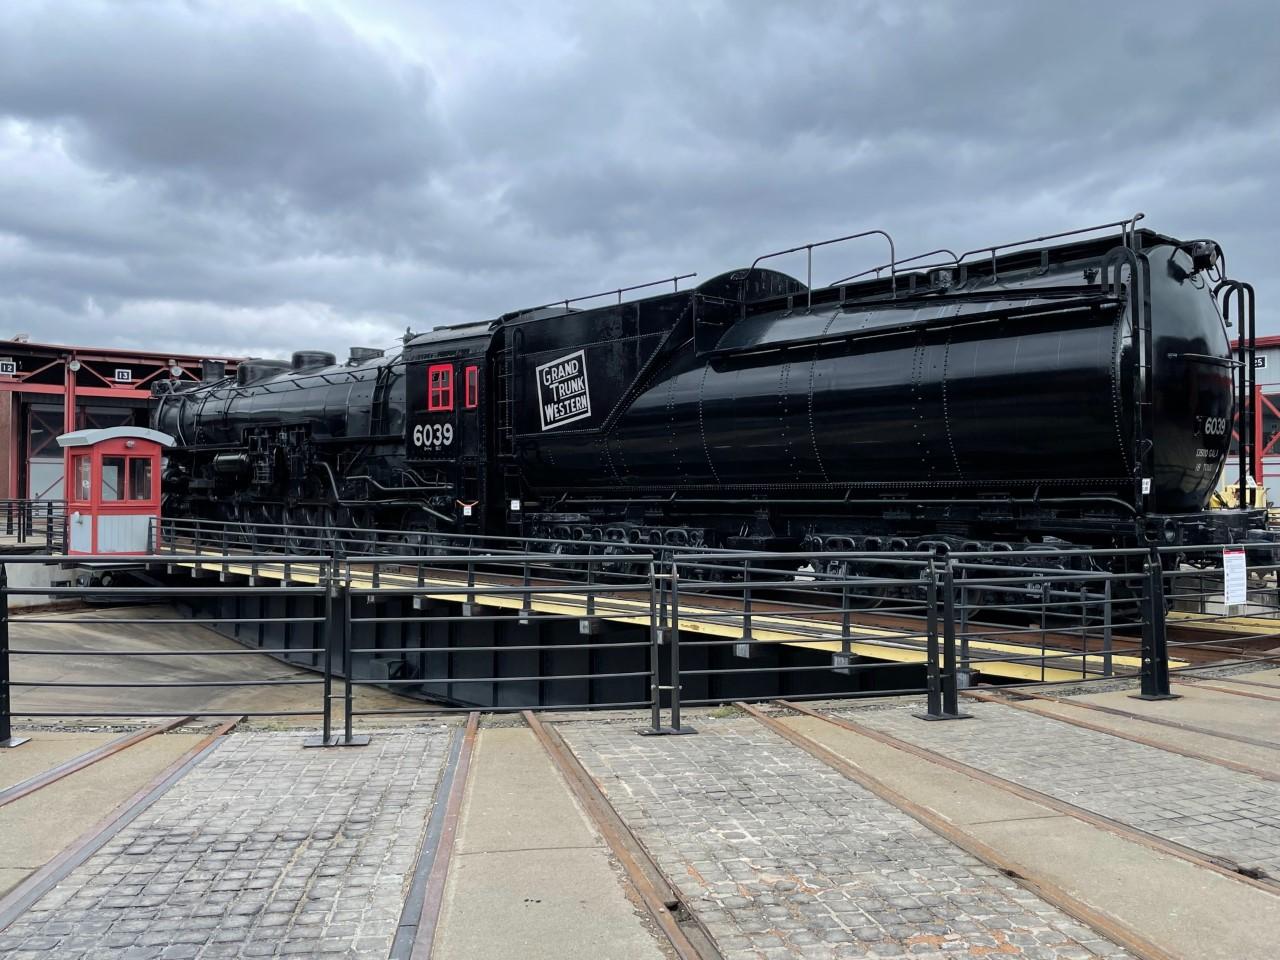 large black train with number 6039 painted in white lettering, sitting on turntable track